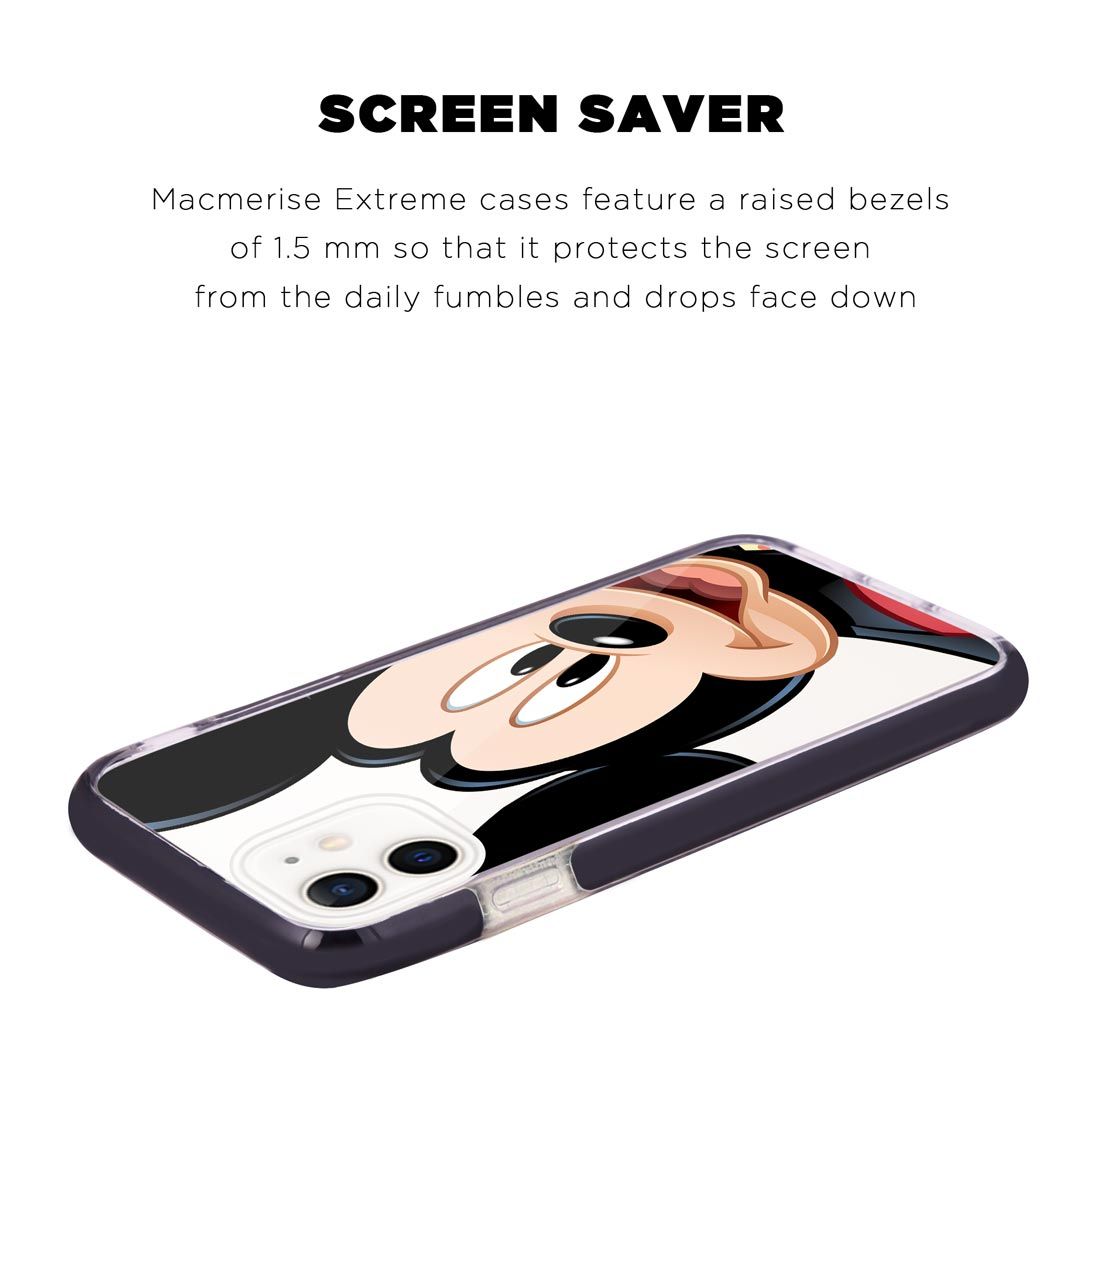 Zoom Up Mickey - Extreme Case for iPhone 12